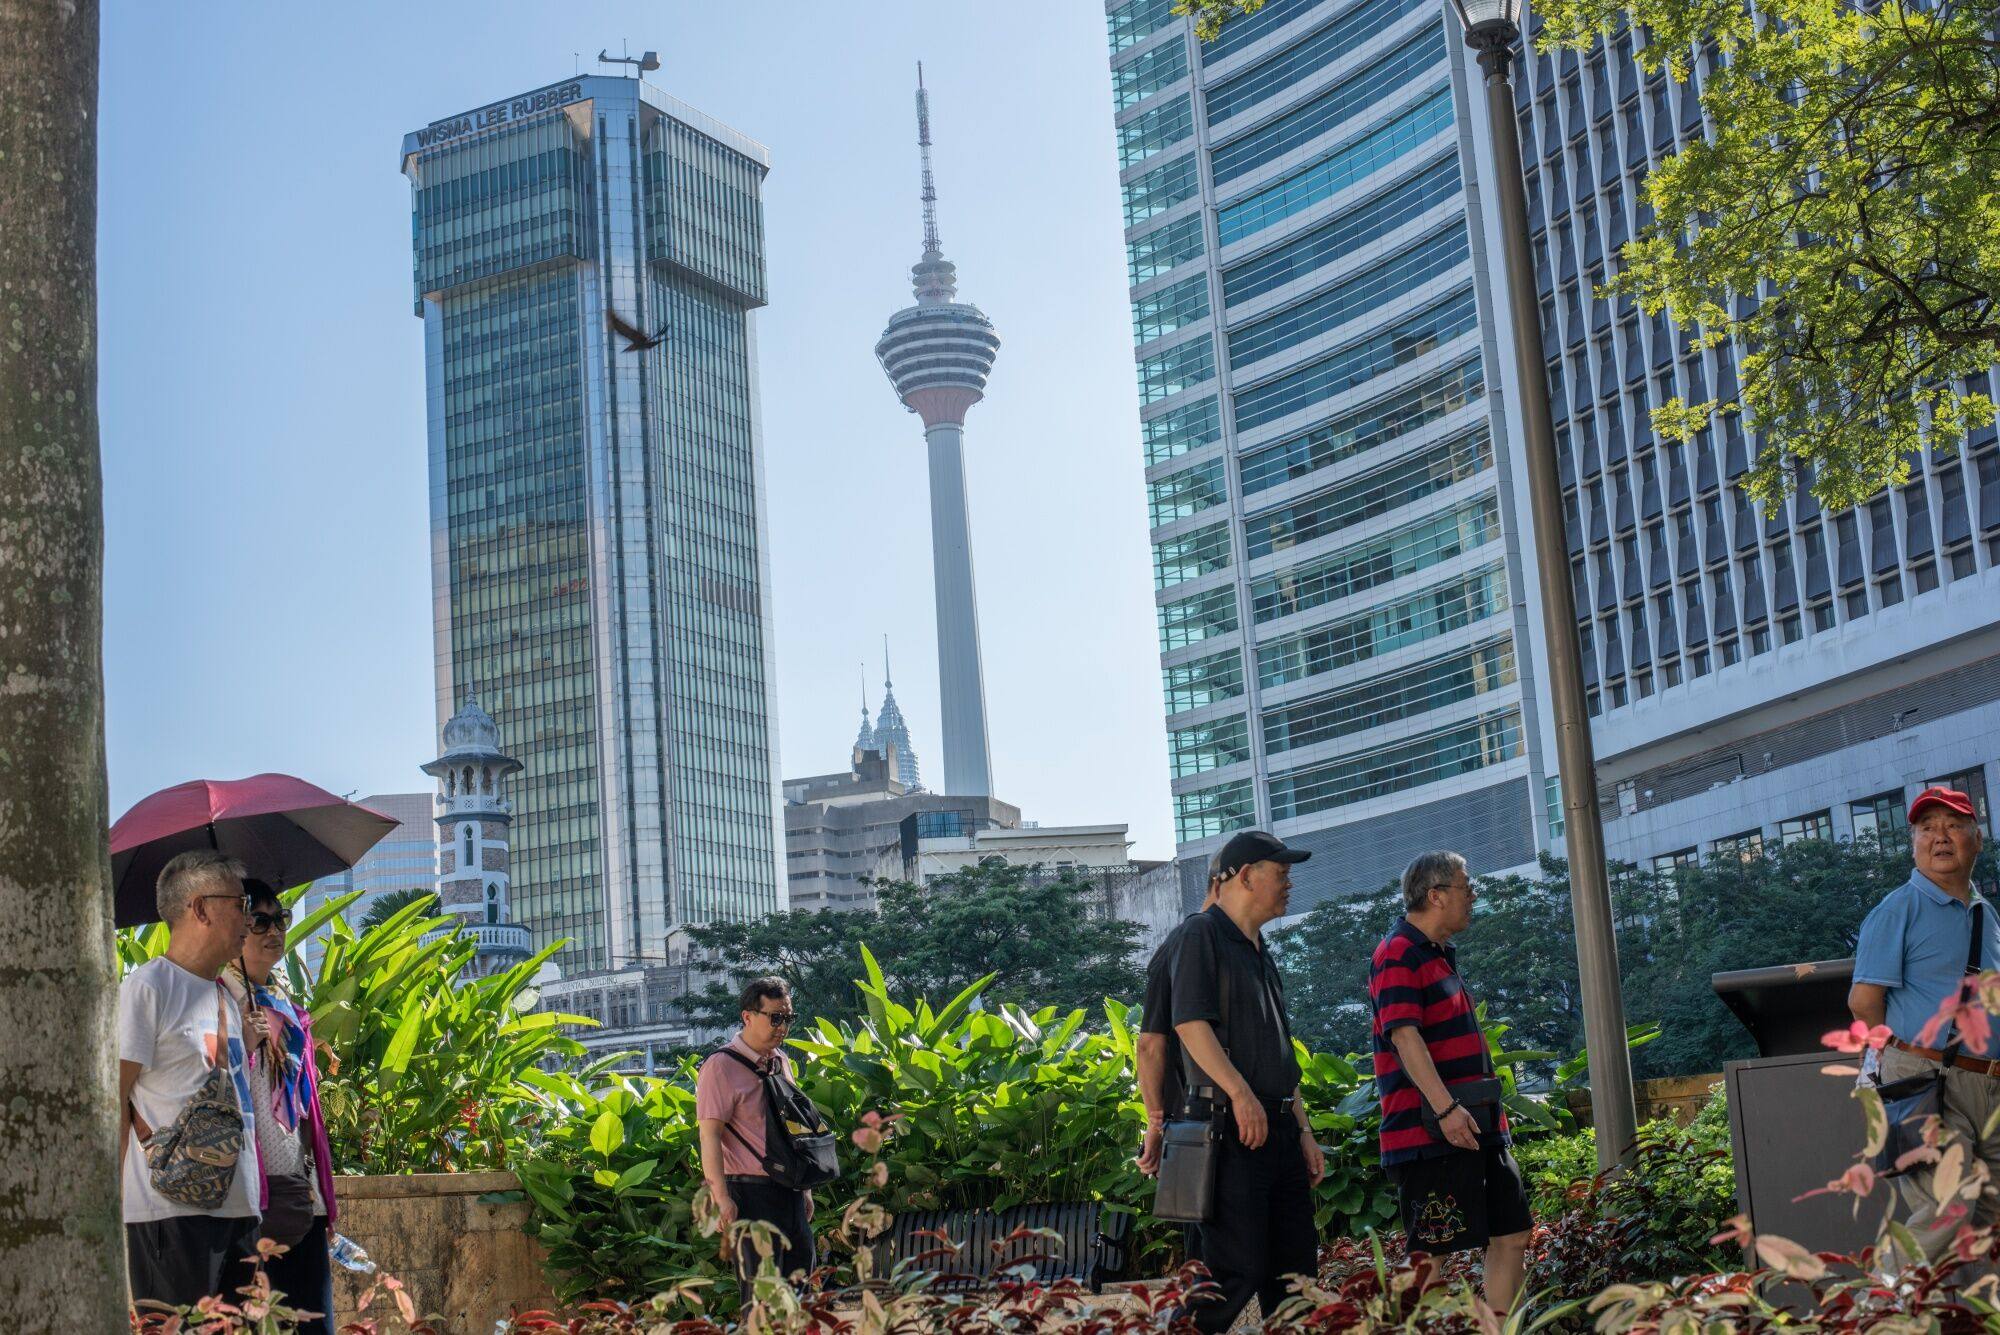 The KL Tower in Kuala Lumpur. The widespread backlash against the Home Ministry’s proposal points to the growing disillusionment toward Prime Minister Anwar Ibrahim’s government. Photo: Bloomberg